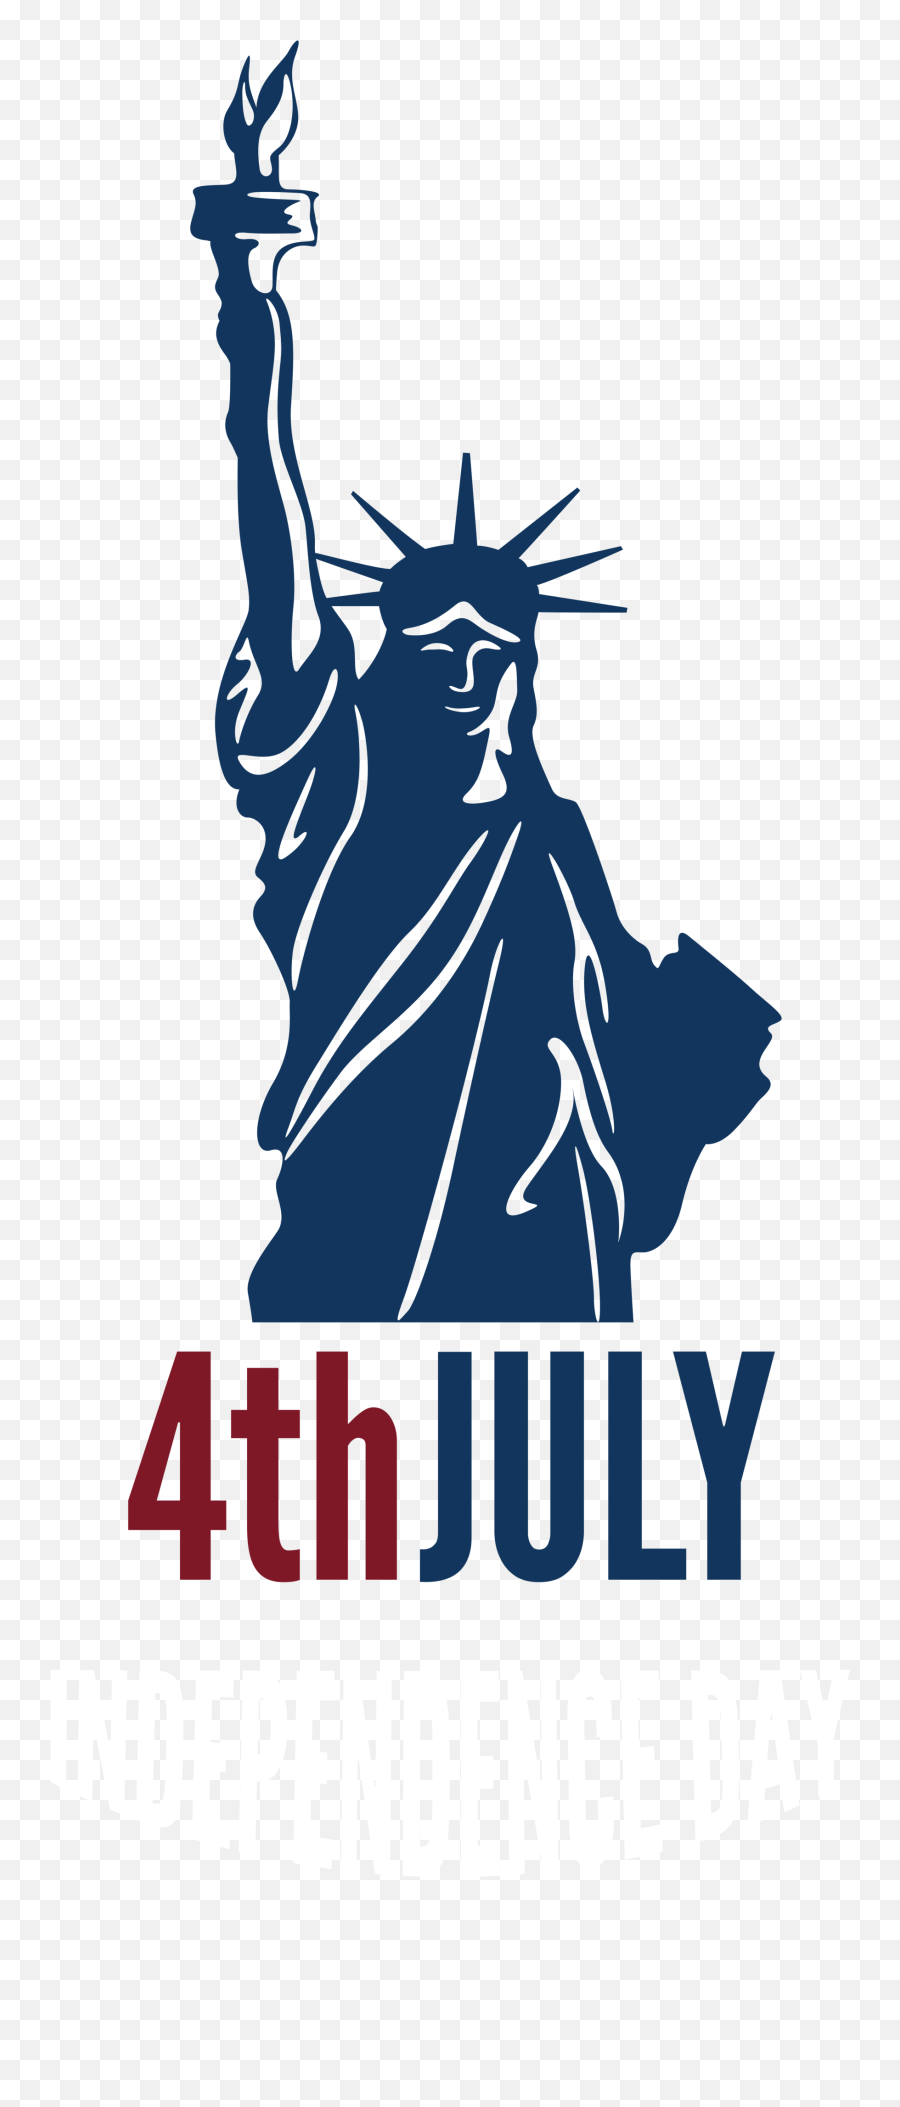 4th July Independence Day With Statue Of Liberty Png Clip - Statue Of Liberty Independence Day Emoji,Independence Day Emoji